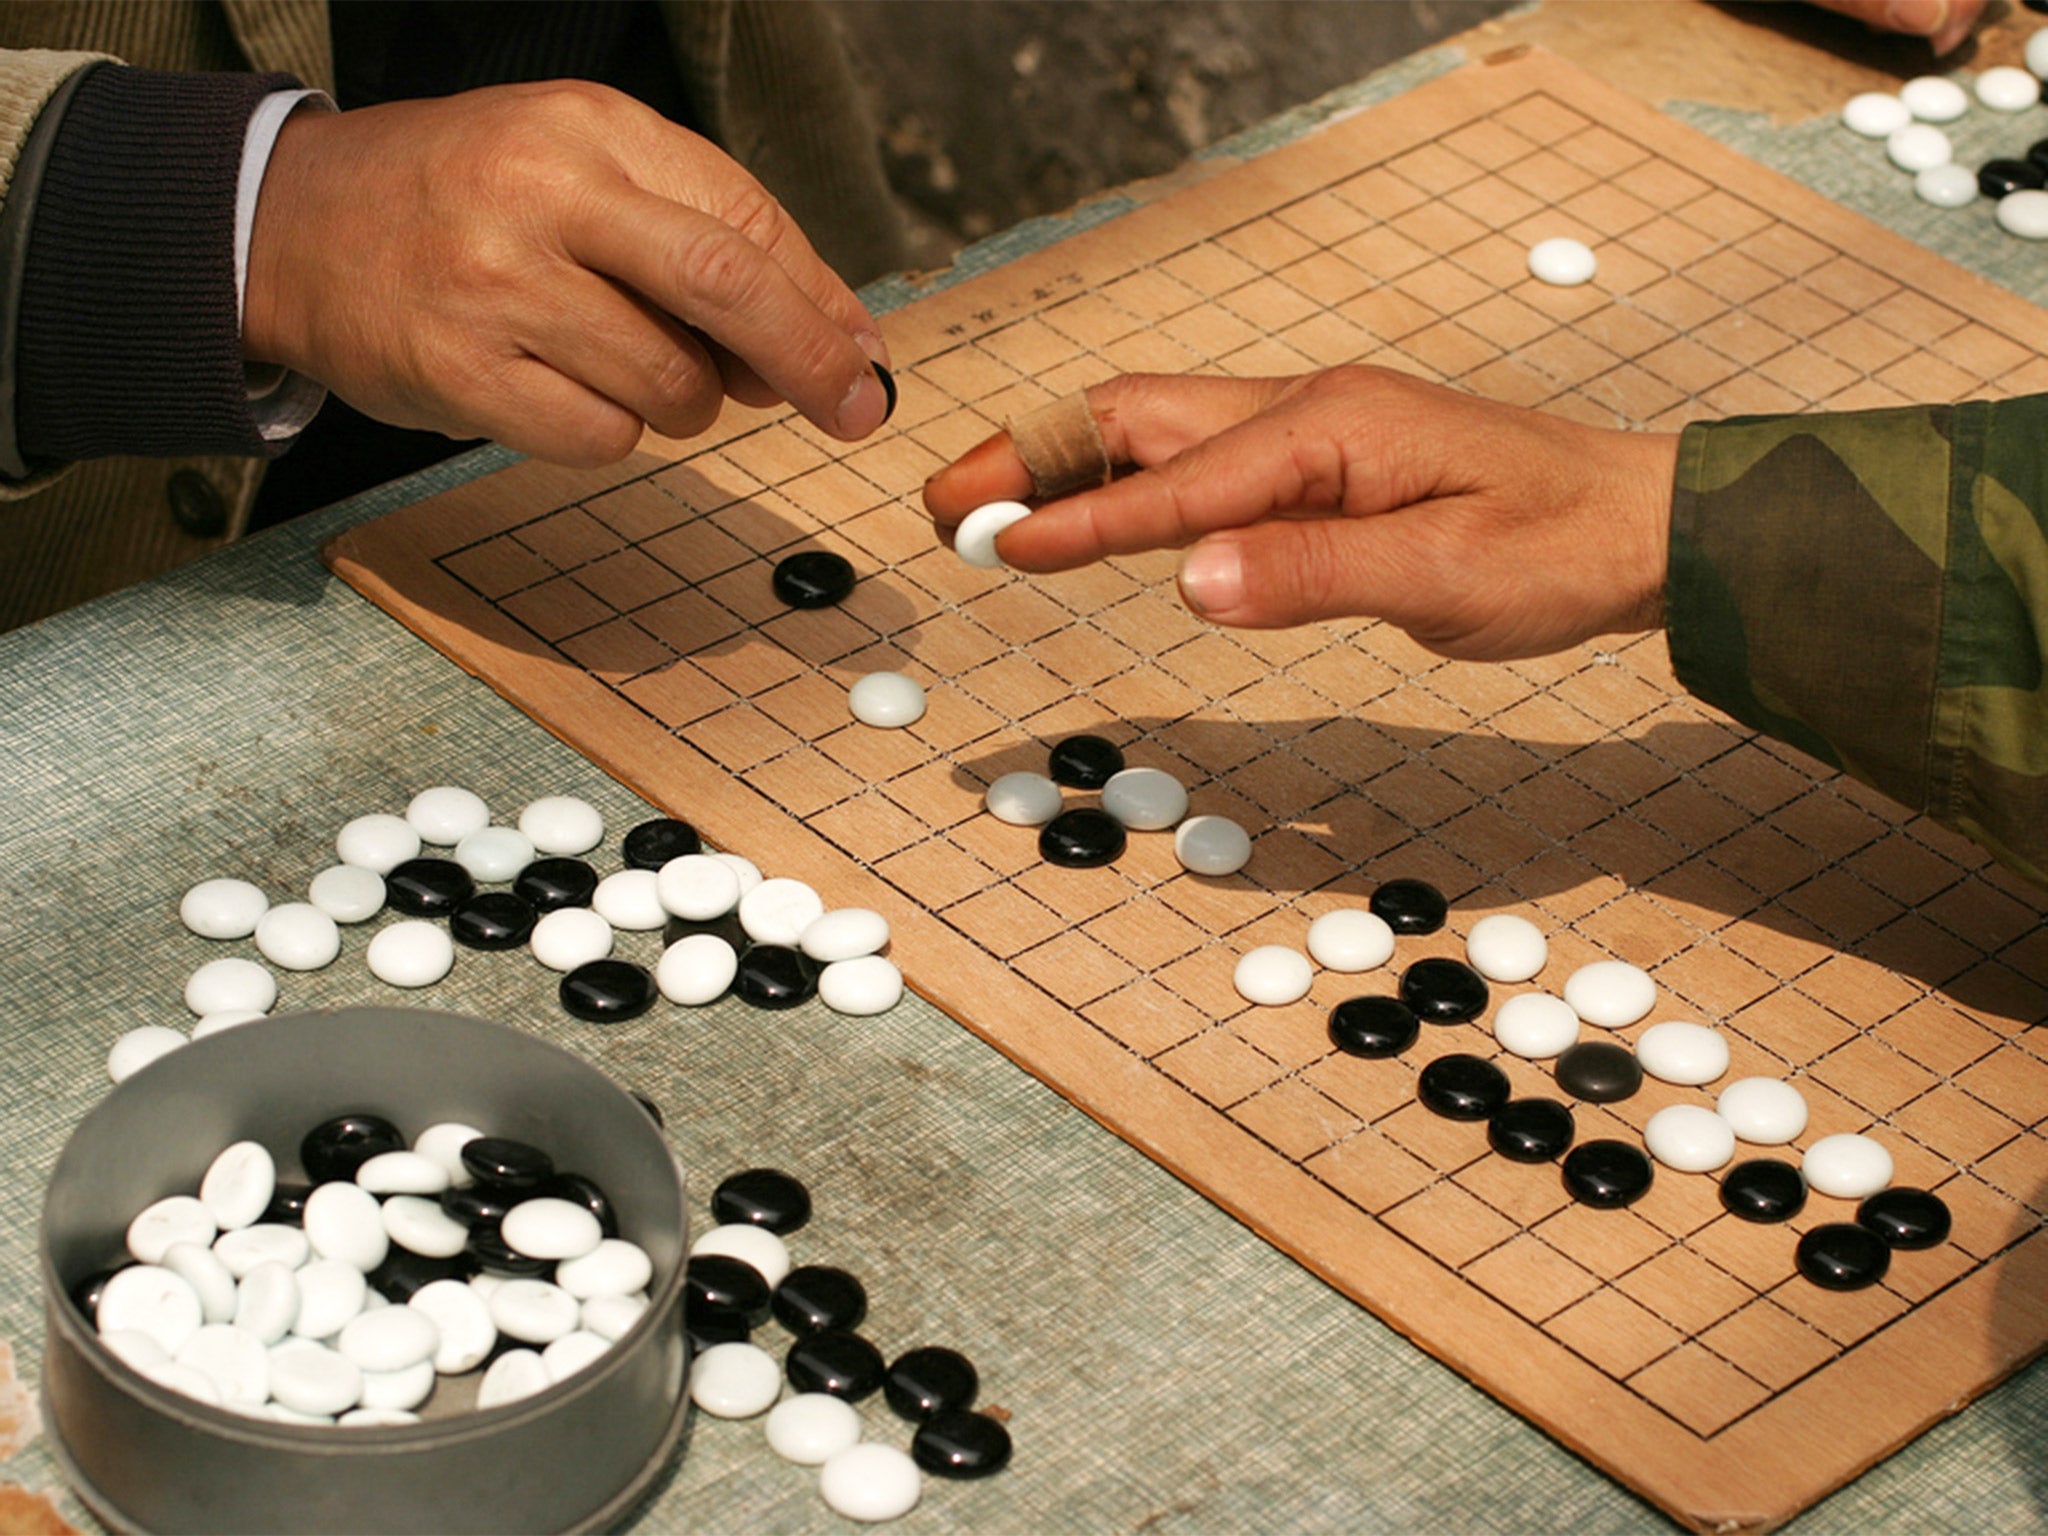 More complex than chess: the Chinese board game Go